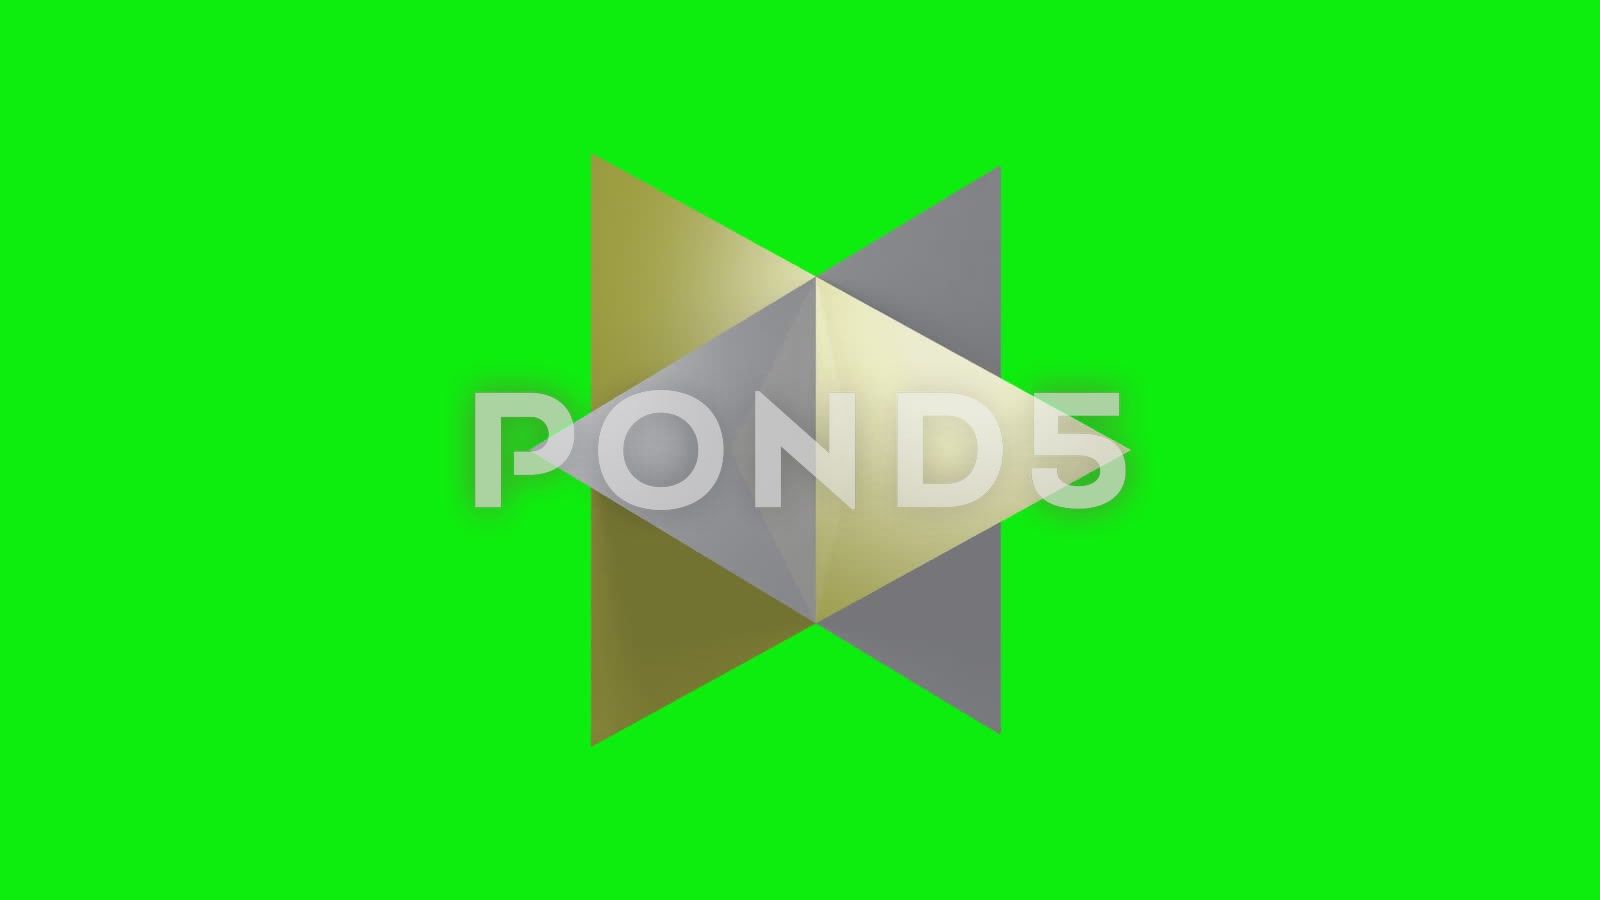 Double Tetrahedron Rotating In Seamless Loop On Green Screen